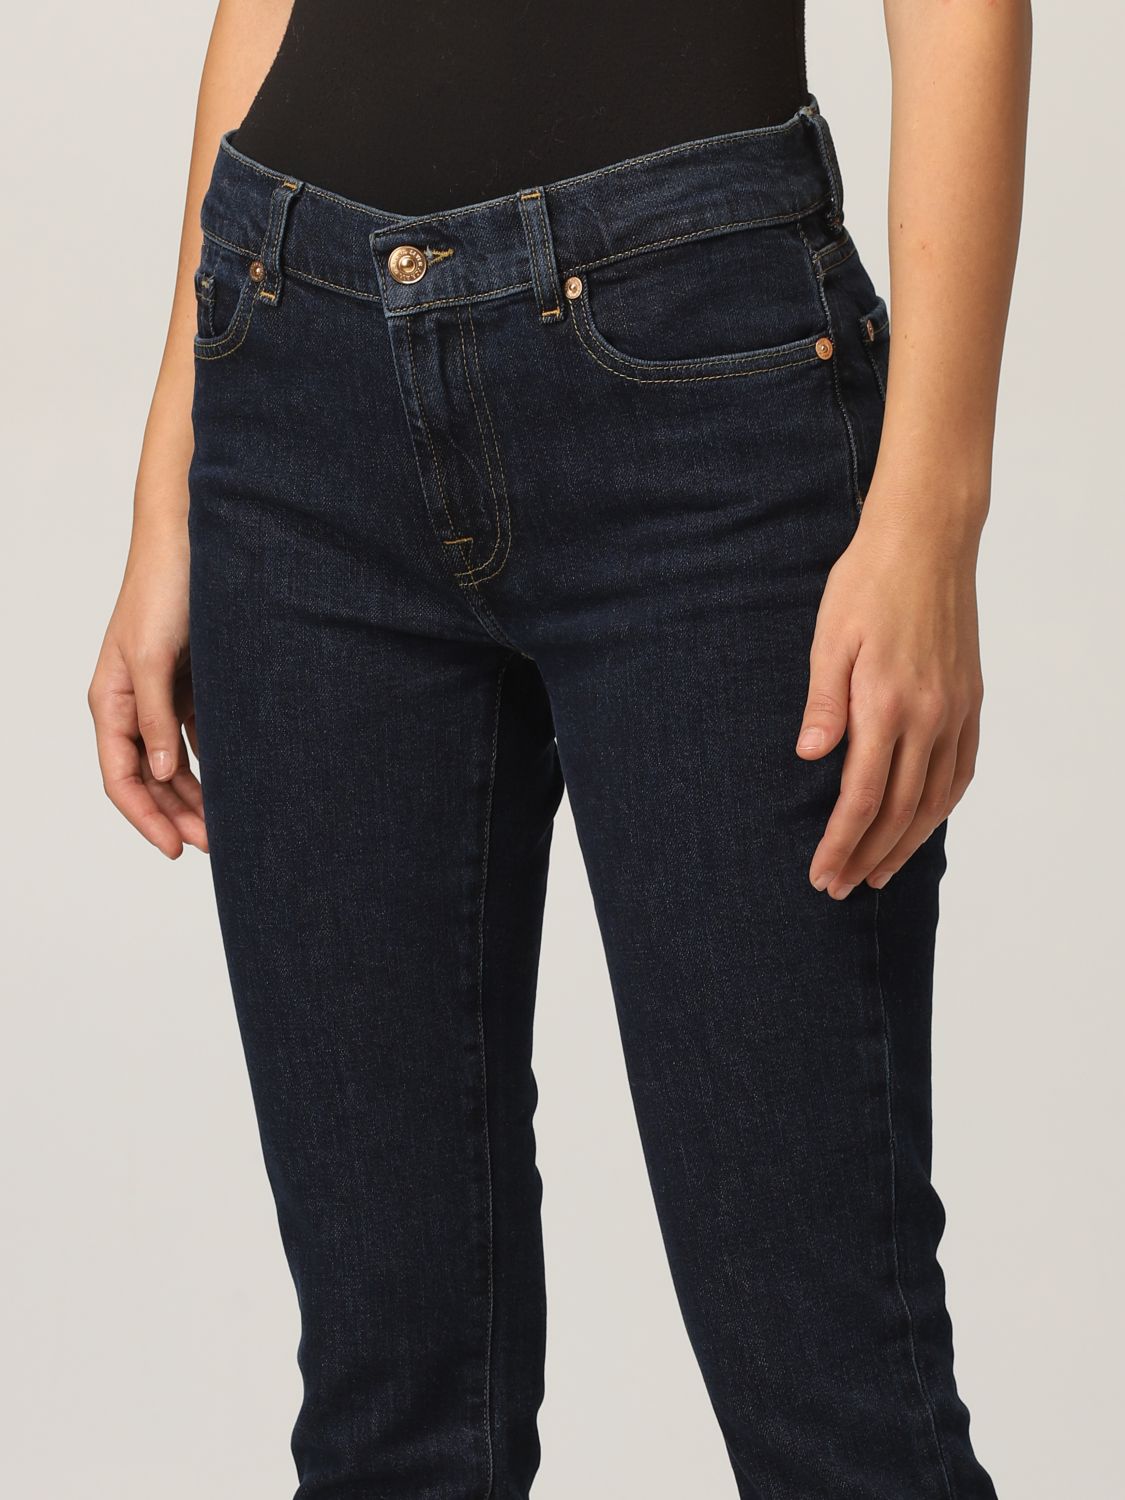 Jeans 7 For All Mankind: 7 For All Mankind Damen jeans blau 3